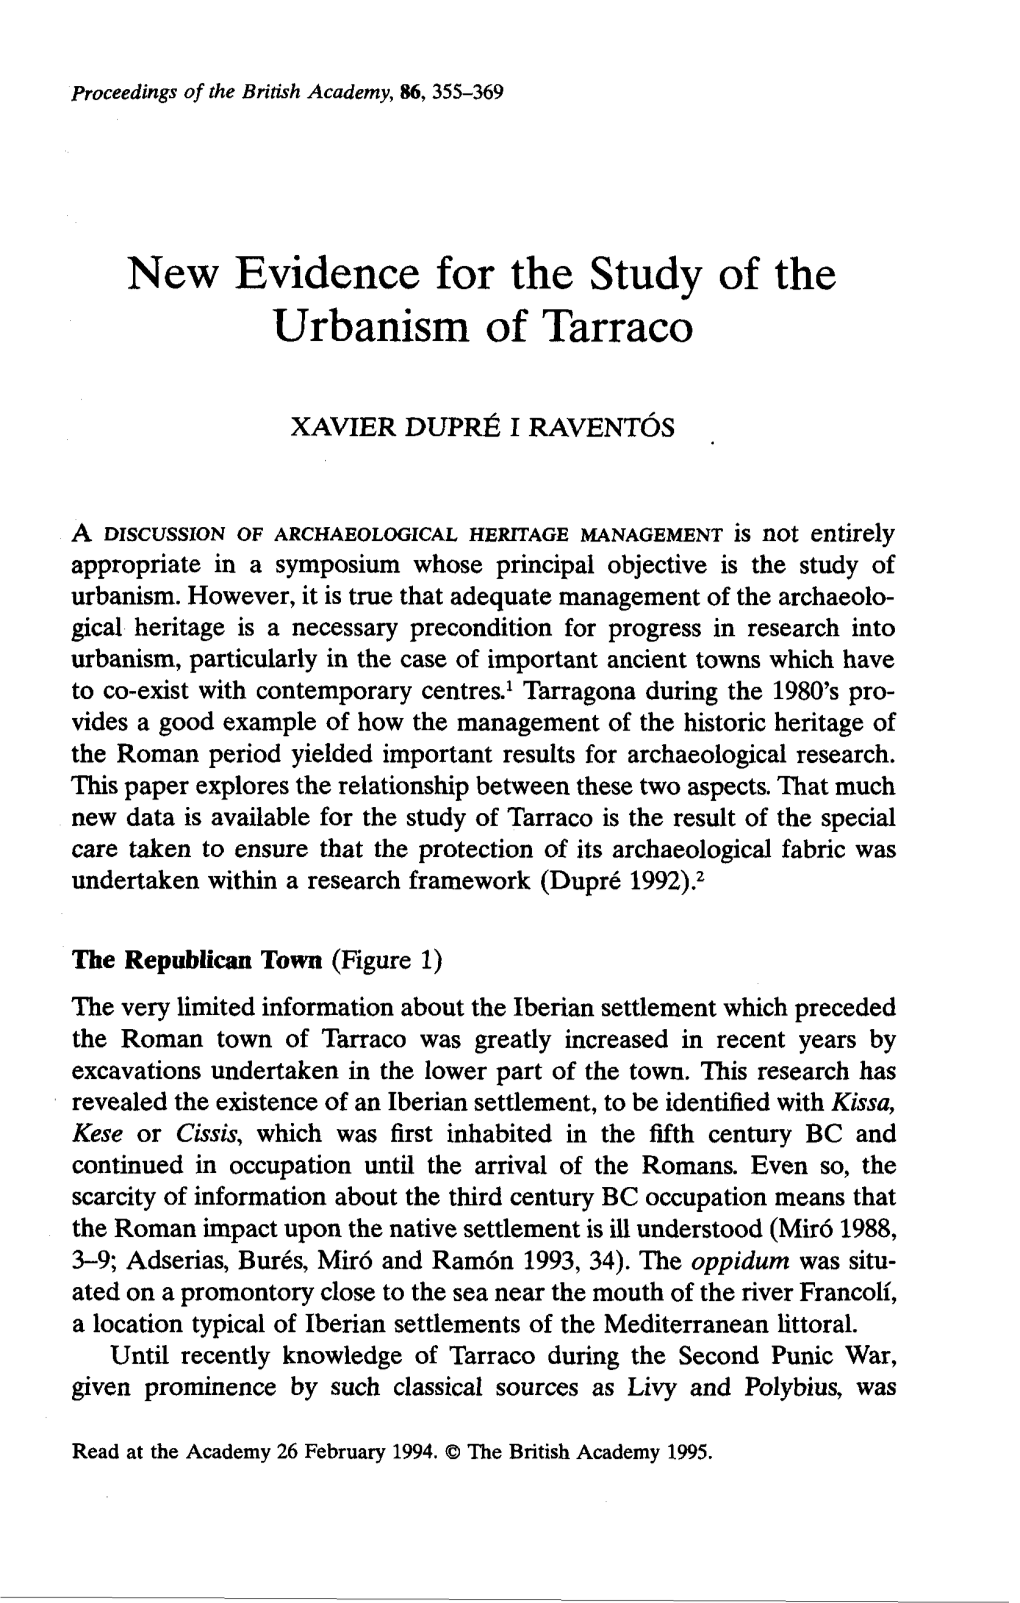 New Evidence for the Study of the Urbanism of Tarraco